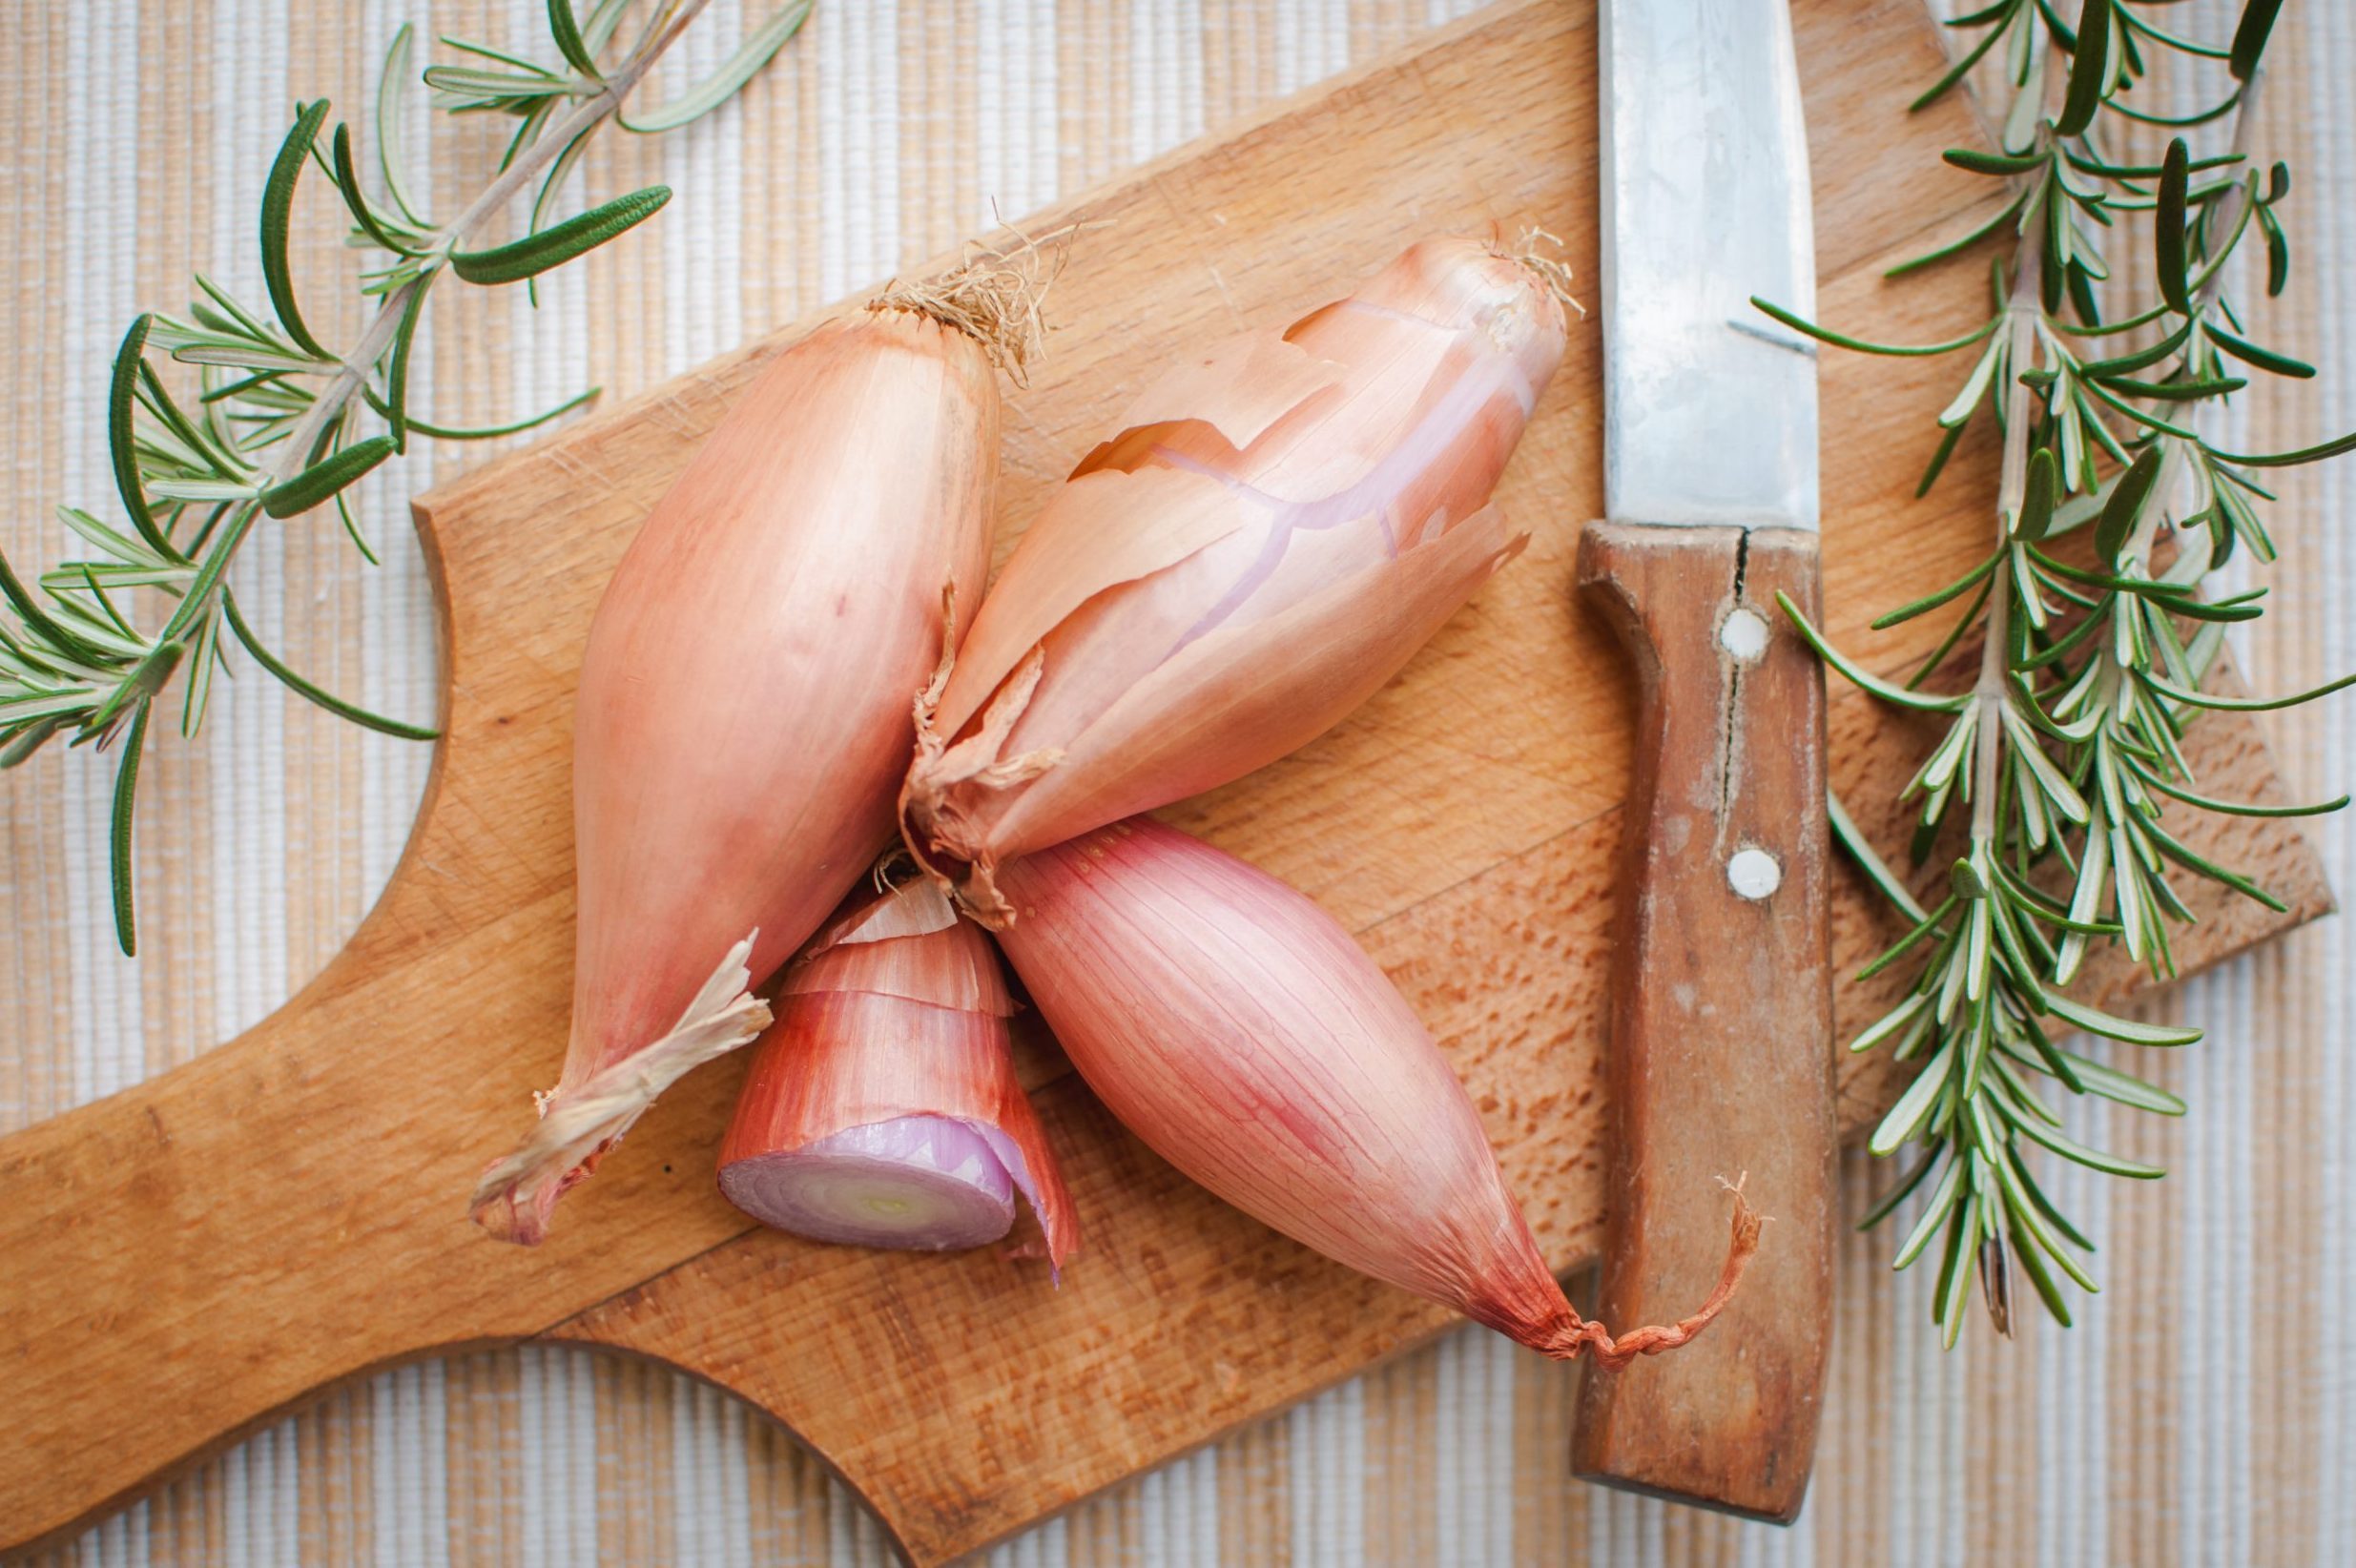 What Are Shallots? Nutrition, Benefits, and Substitutes